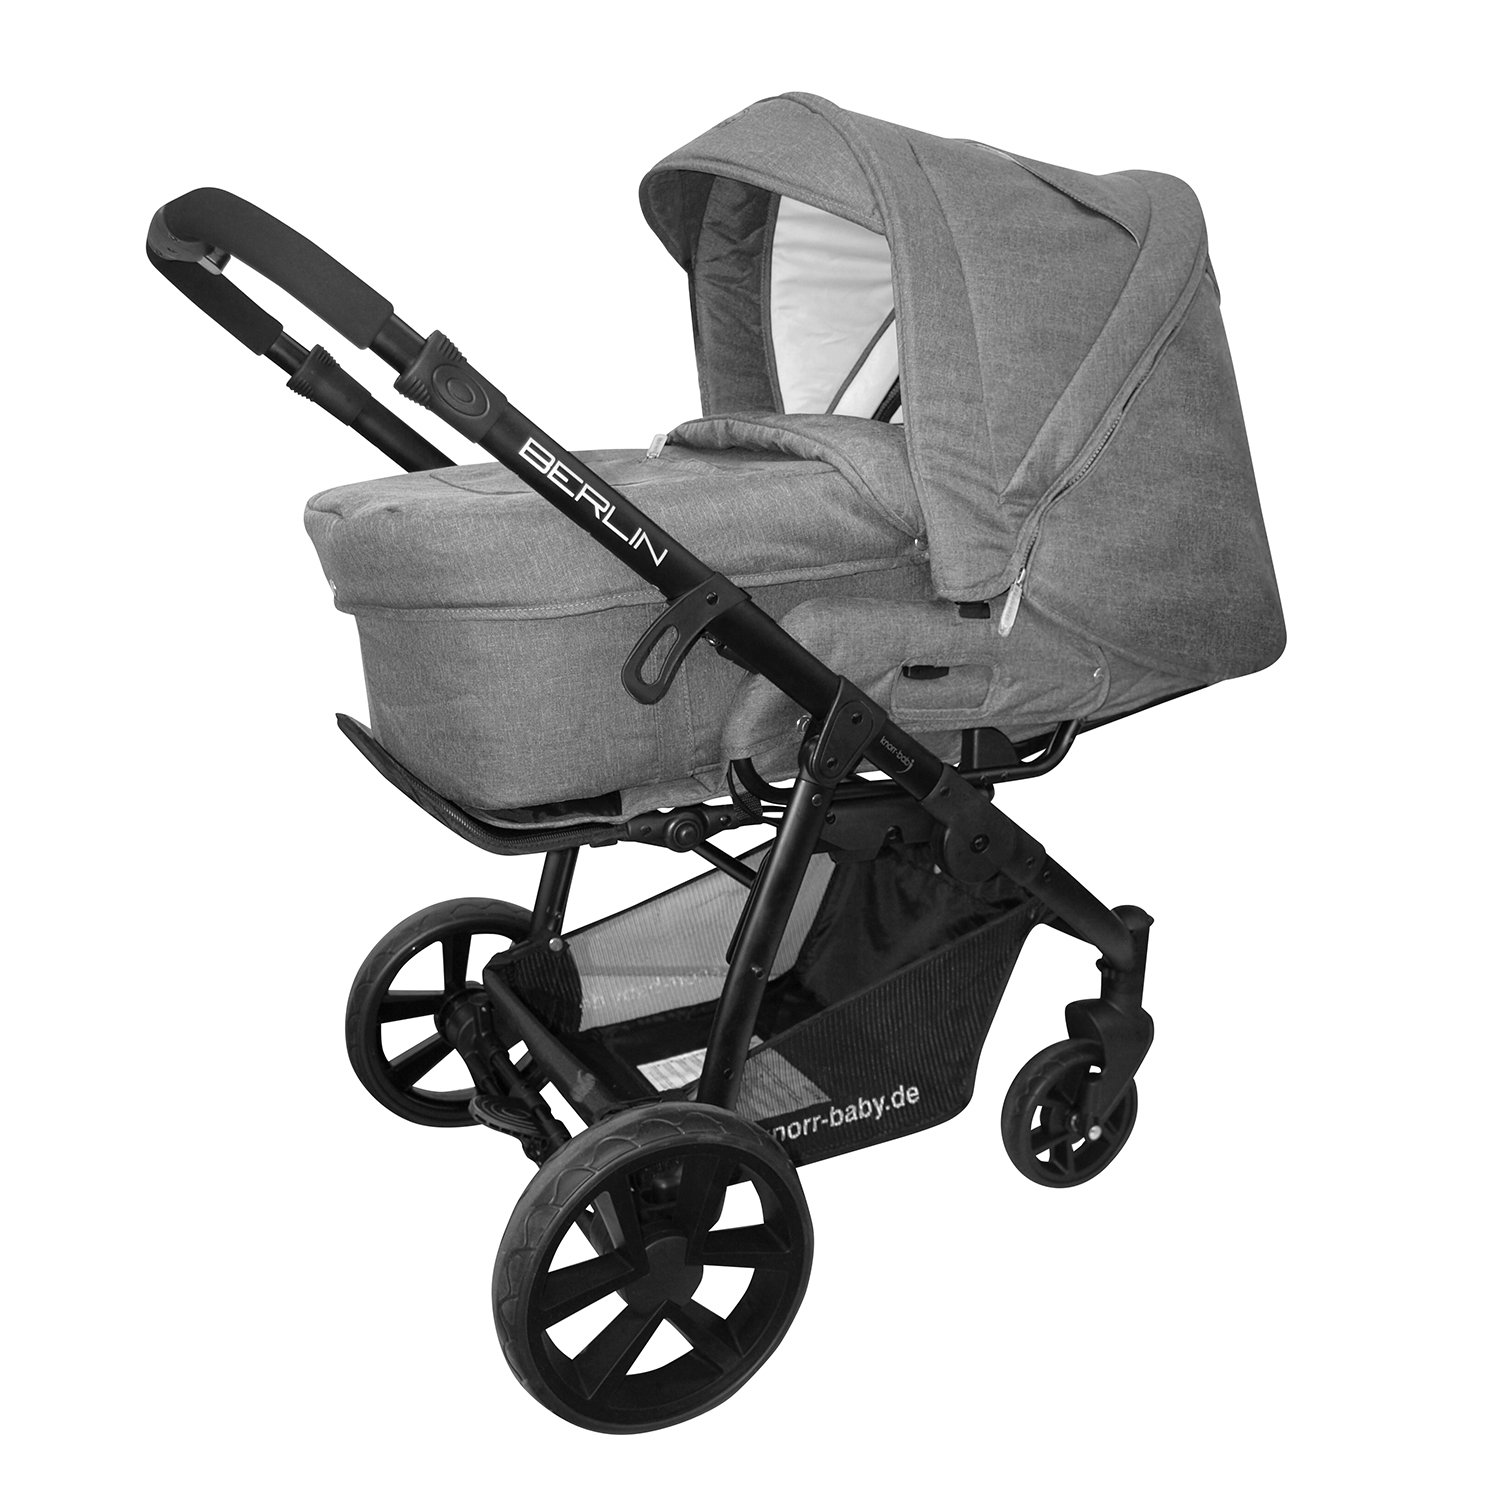 Knorr-Baby Berlin 797500 Travel System with Carry Bag, grey